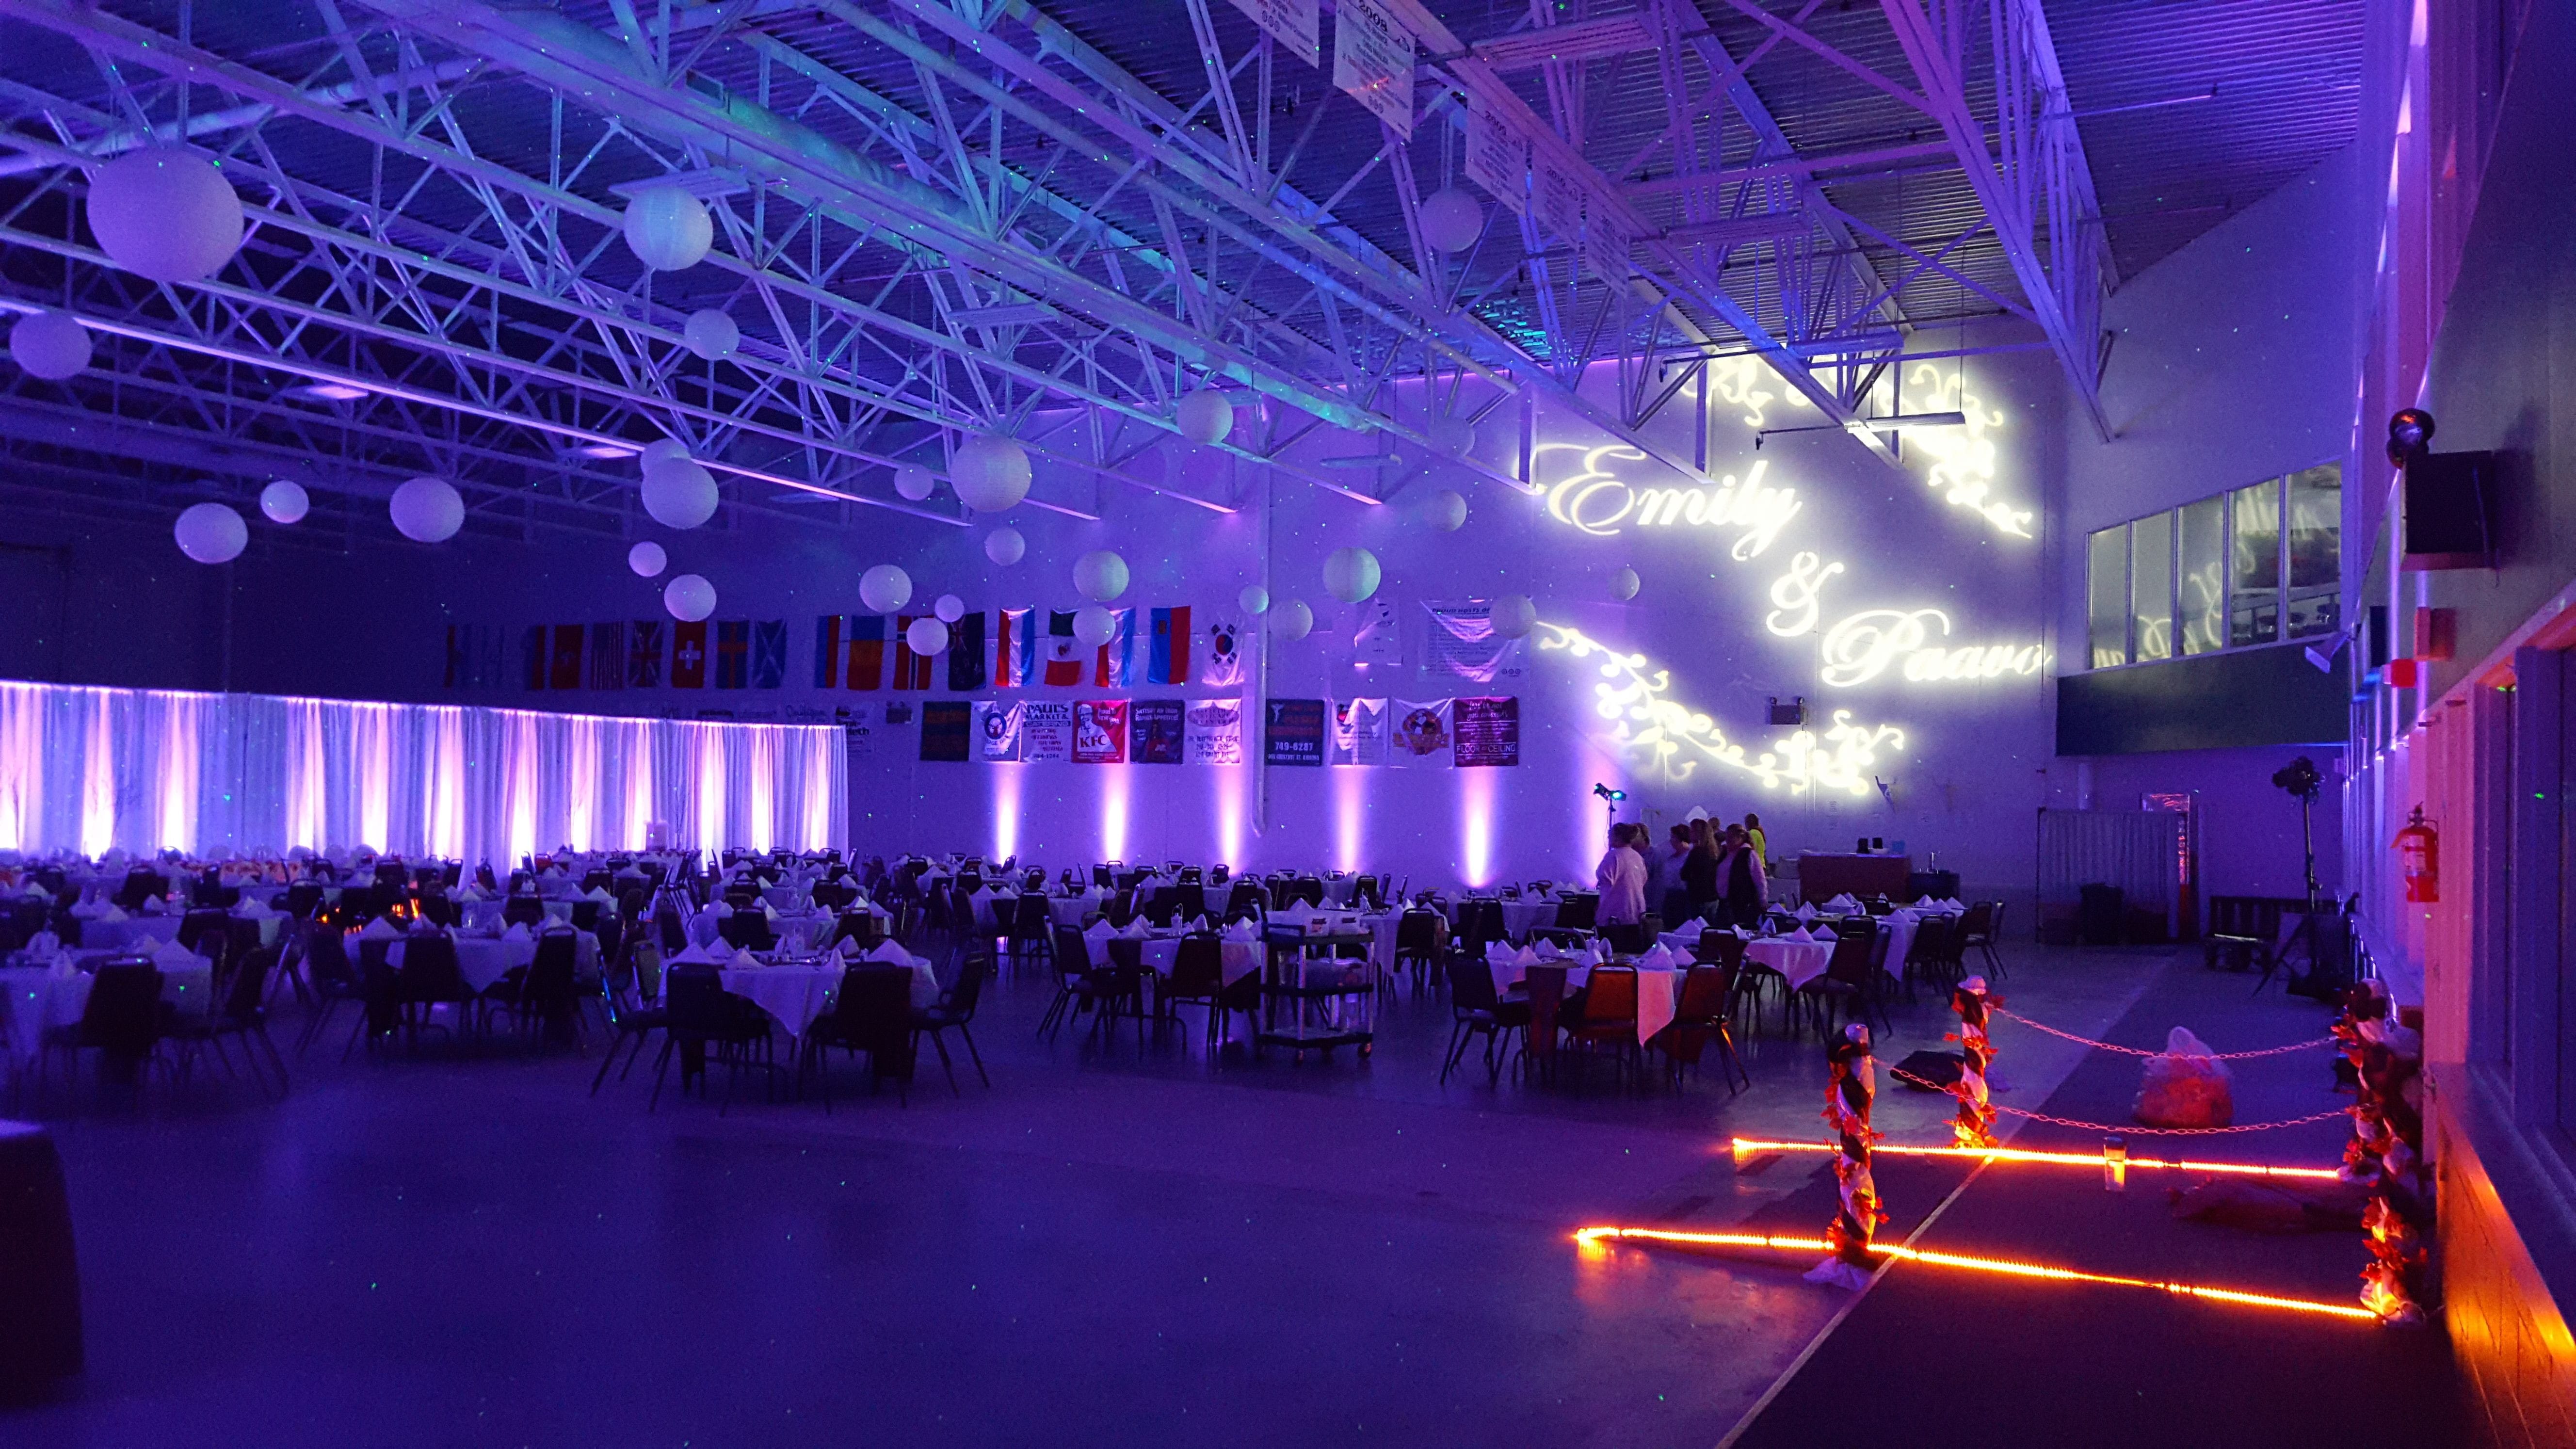 Wedding lighting at the Eveleth Curling Club. Up lighting in lavender purple with wedding monogram.